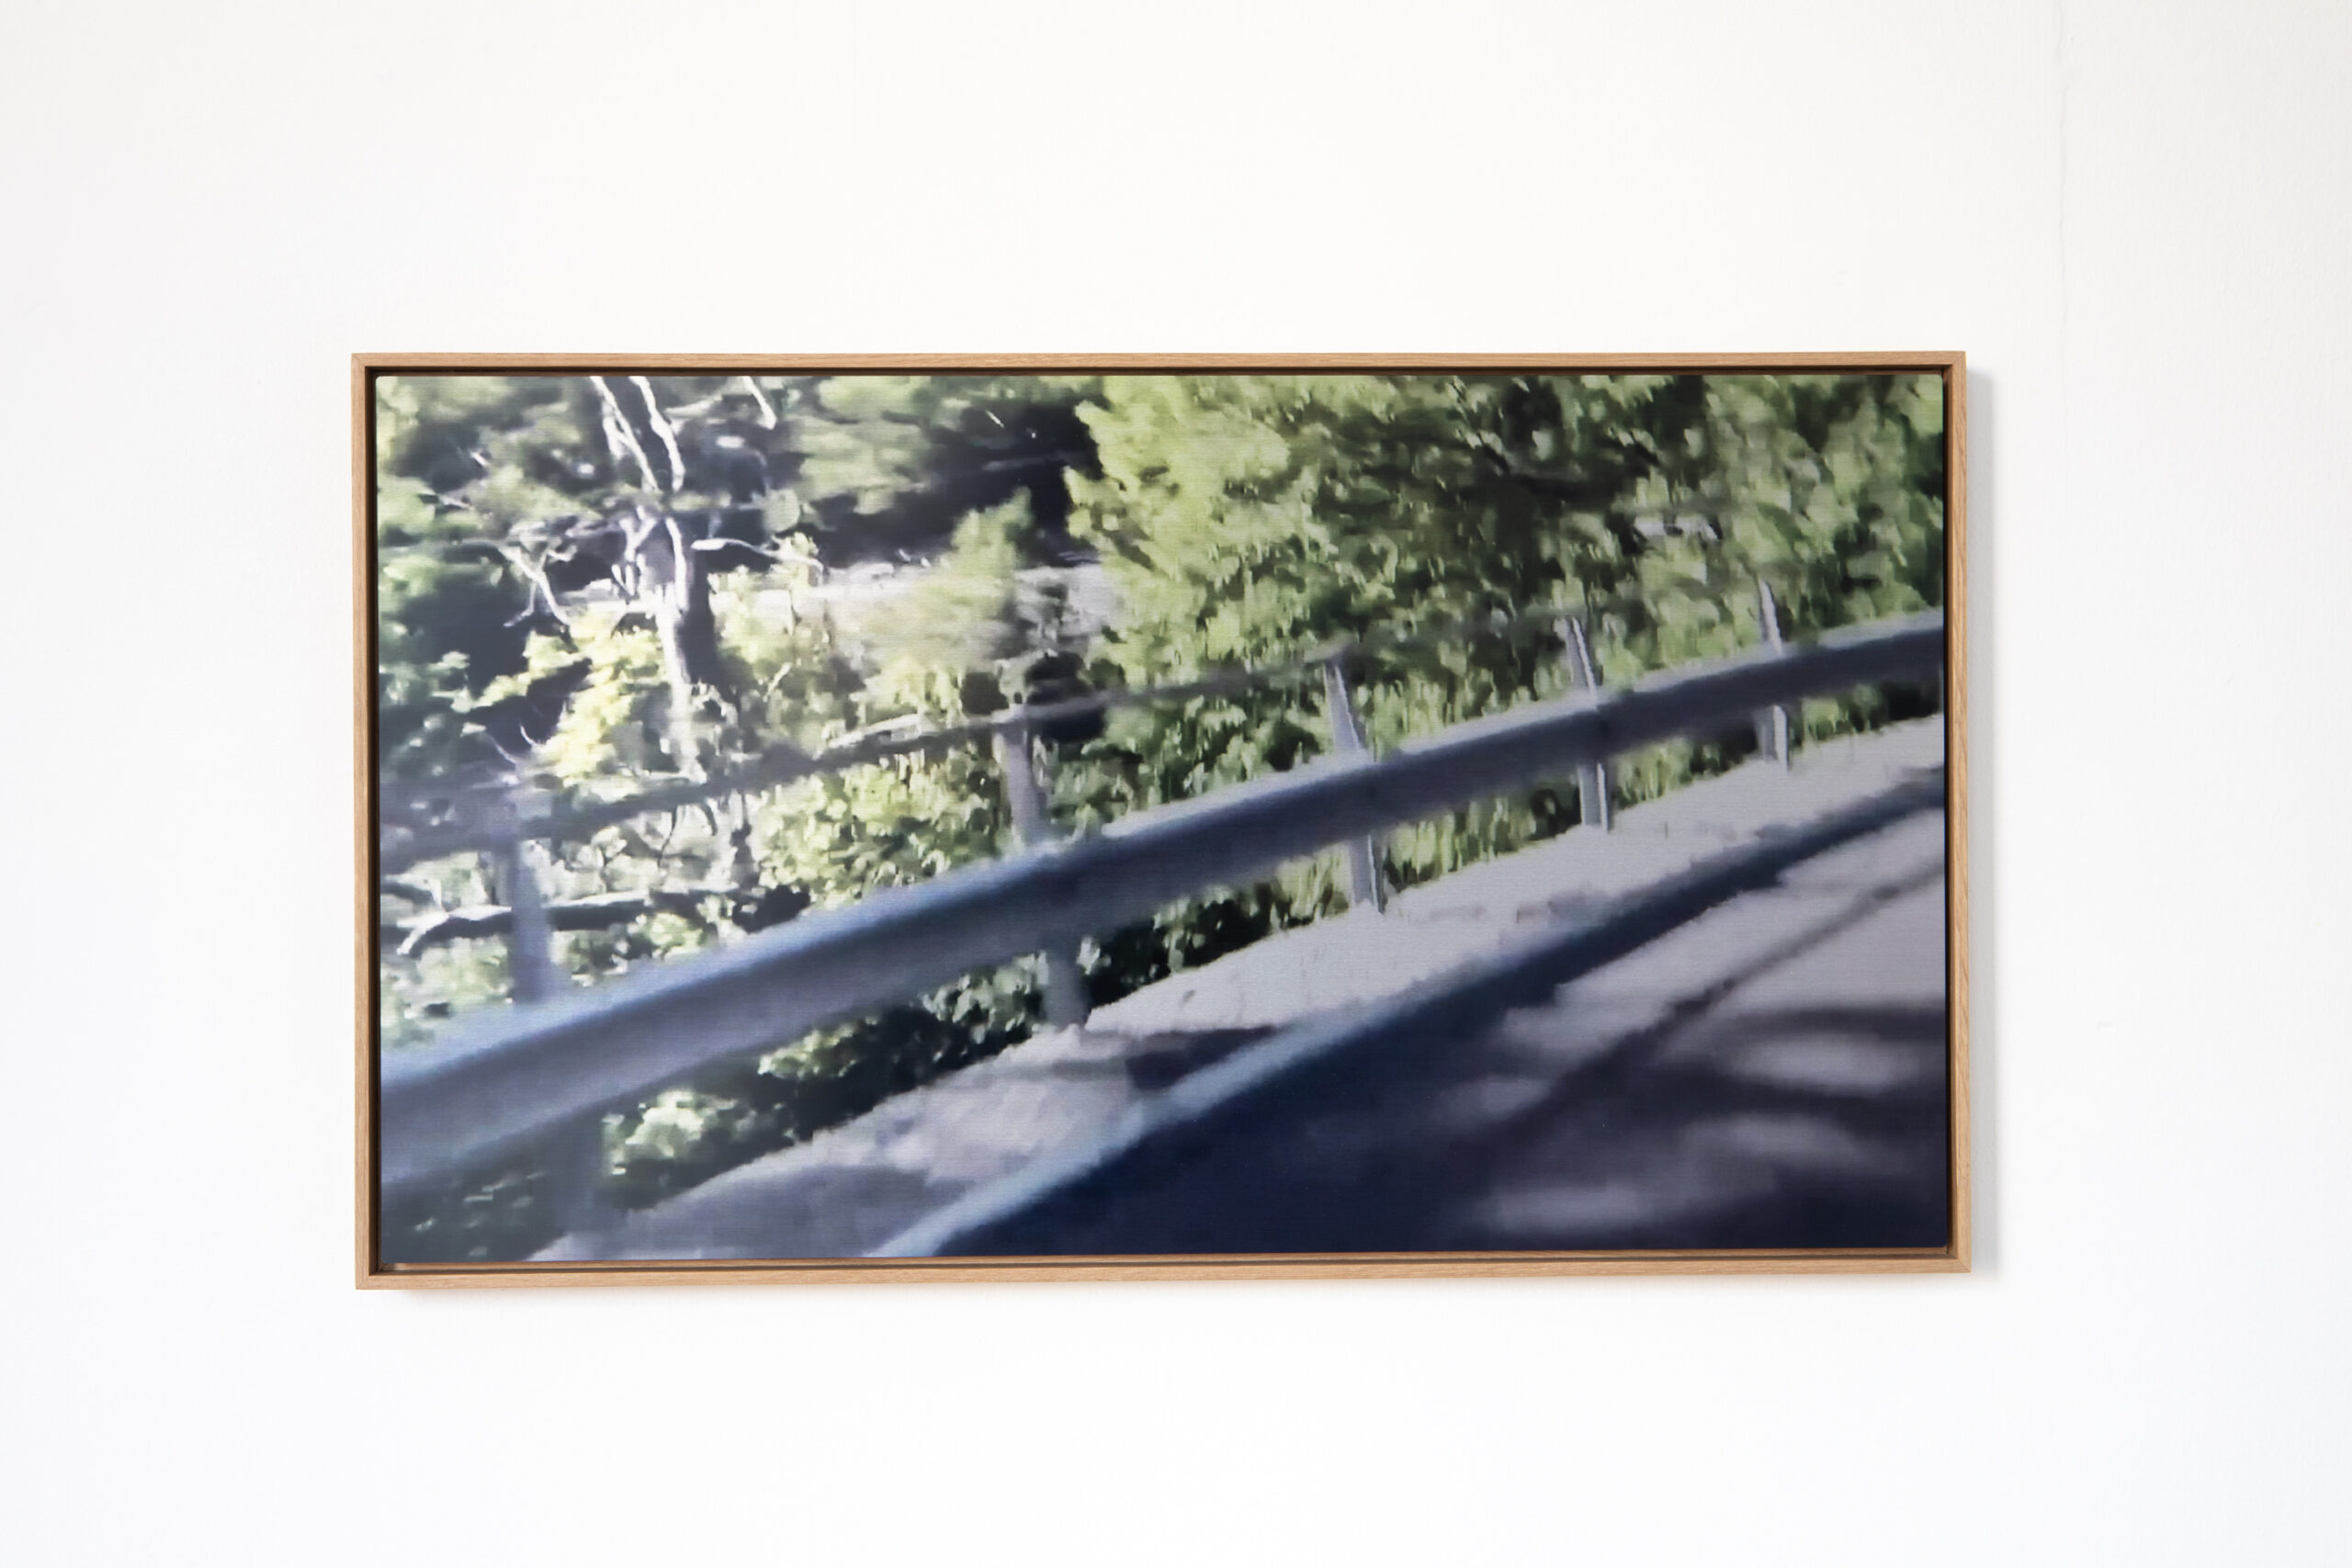 Benjamin Fitton A competitor has just disappeared, 03 (LdP) (2023) Dye sublimation on aluminium with oak frame 59 x 34cm